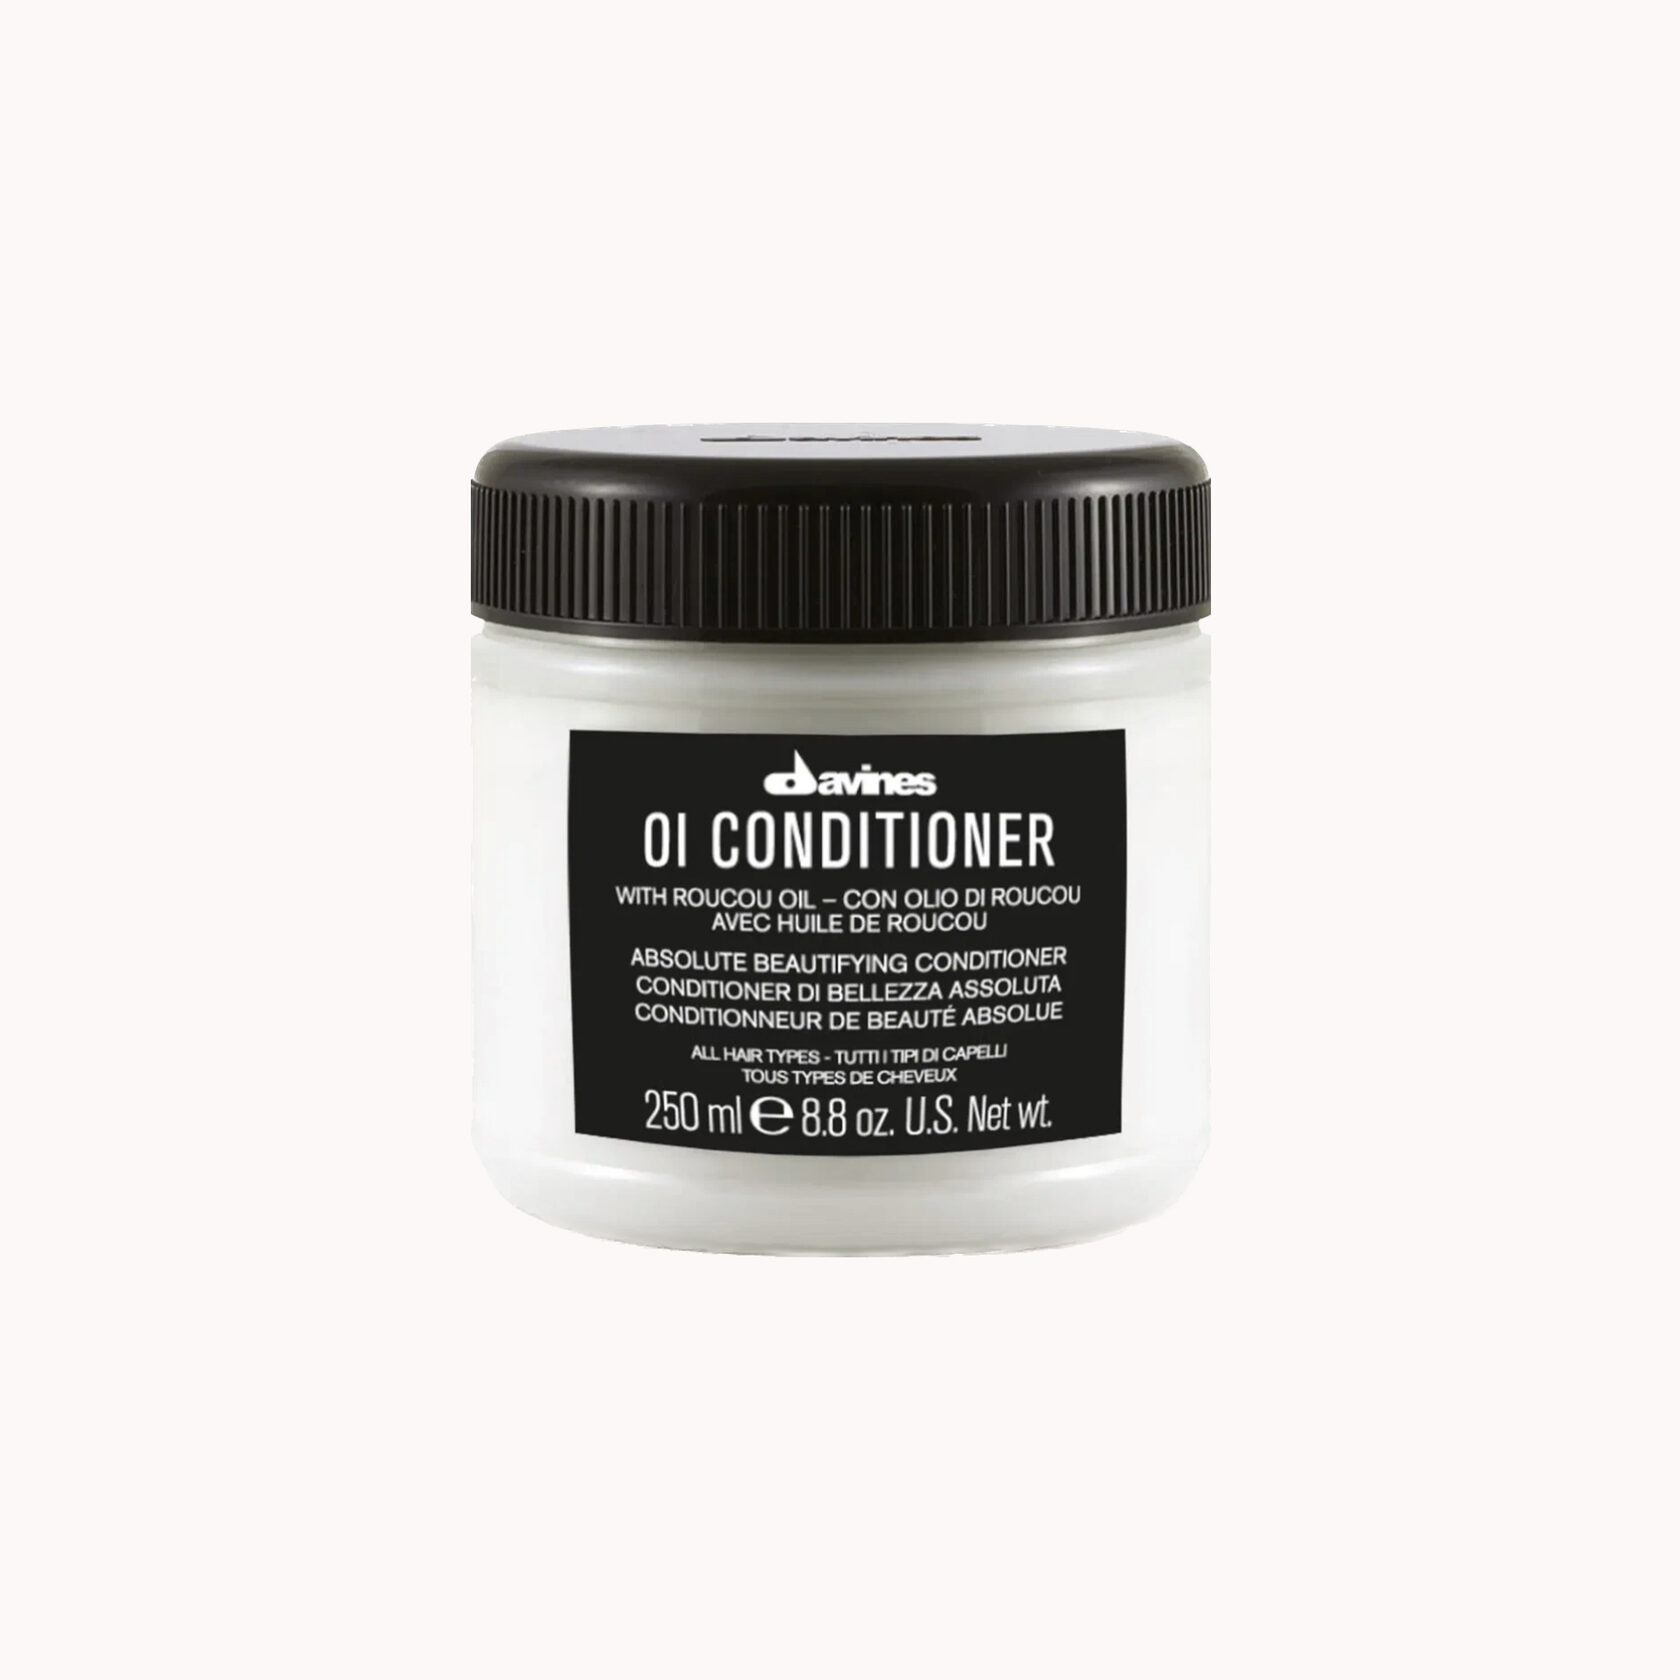 Oi absolute beautifying. Davines кондиционер oi absolute Beautifying. Davines Essential Haircare oi/Conditioner absolute Beautifying Potion. Davines oi Milk 135. Oi/absolute Beautifying Conditioner - кондиционер для абсолютной красоты волос.